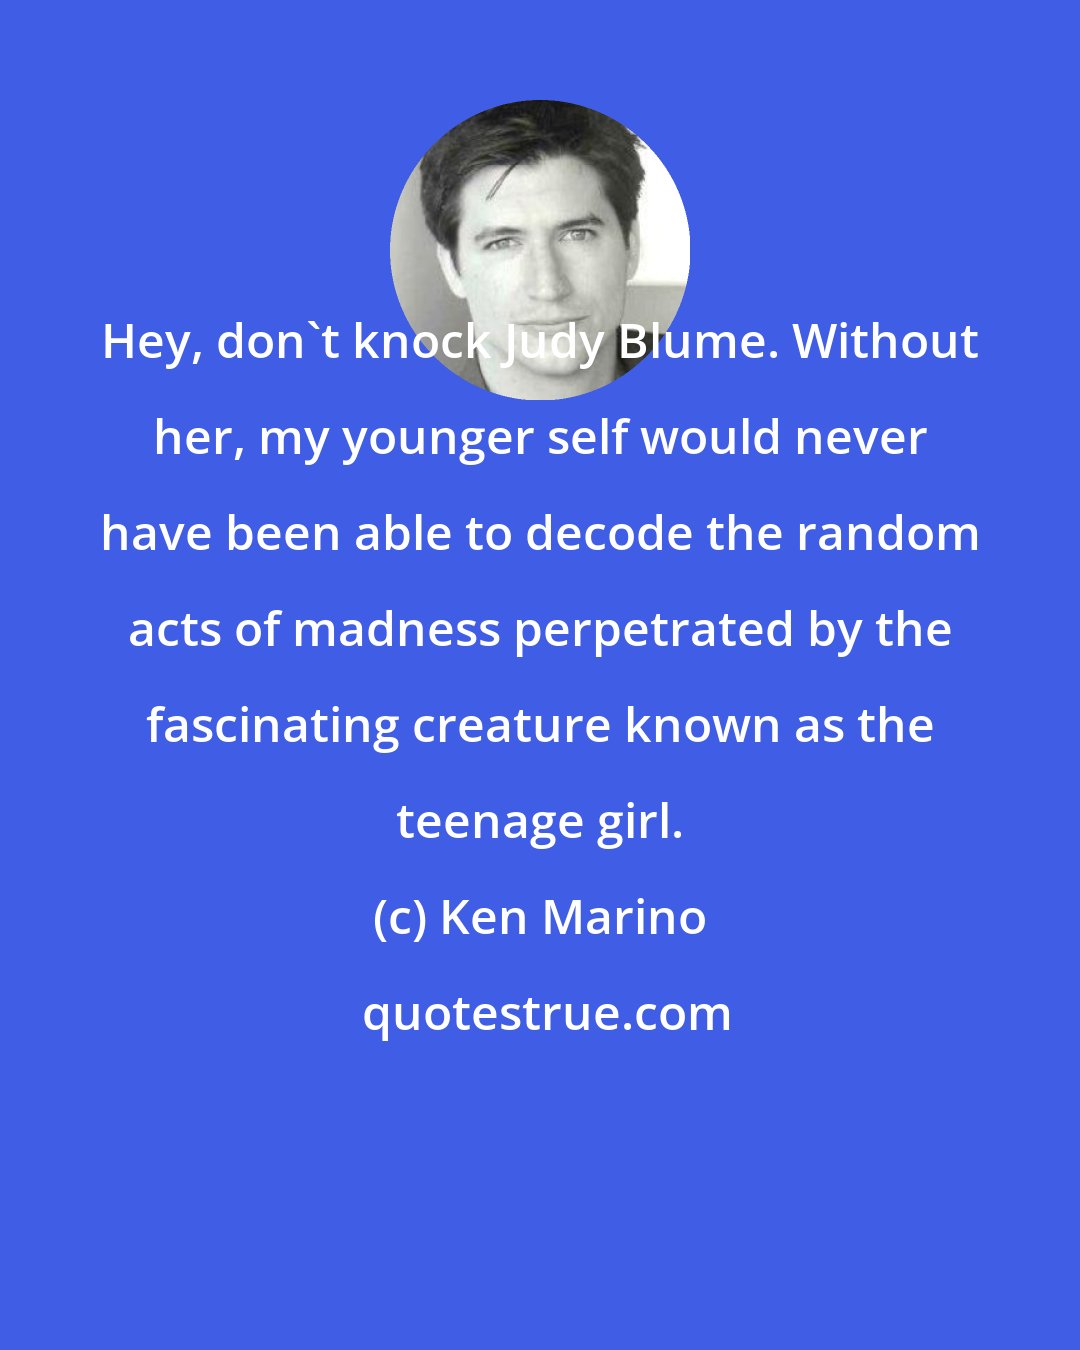 Ken Marino: Hey, don't knock Judy Blume. Without her, my younger self would never have been able to decode the random acts of madness perpetrated by the fascinating creature known as the teenage girl.